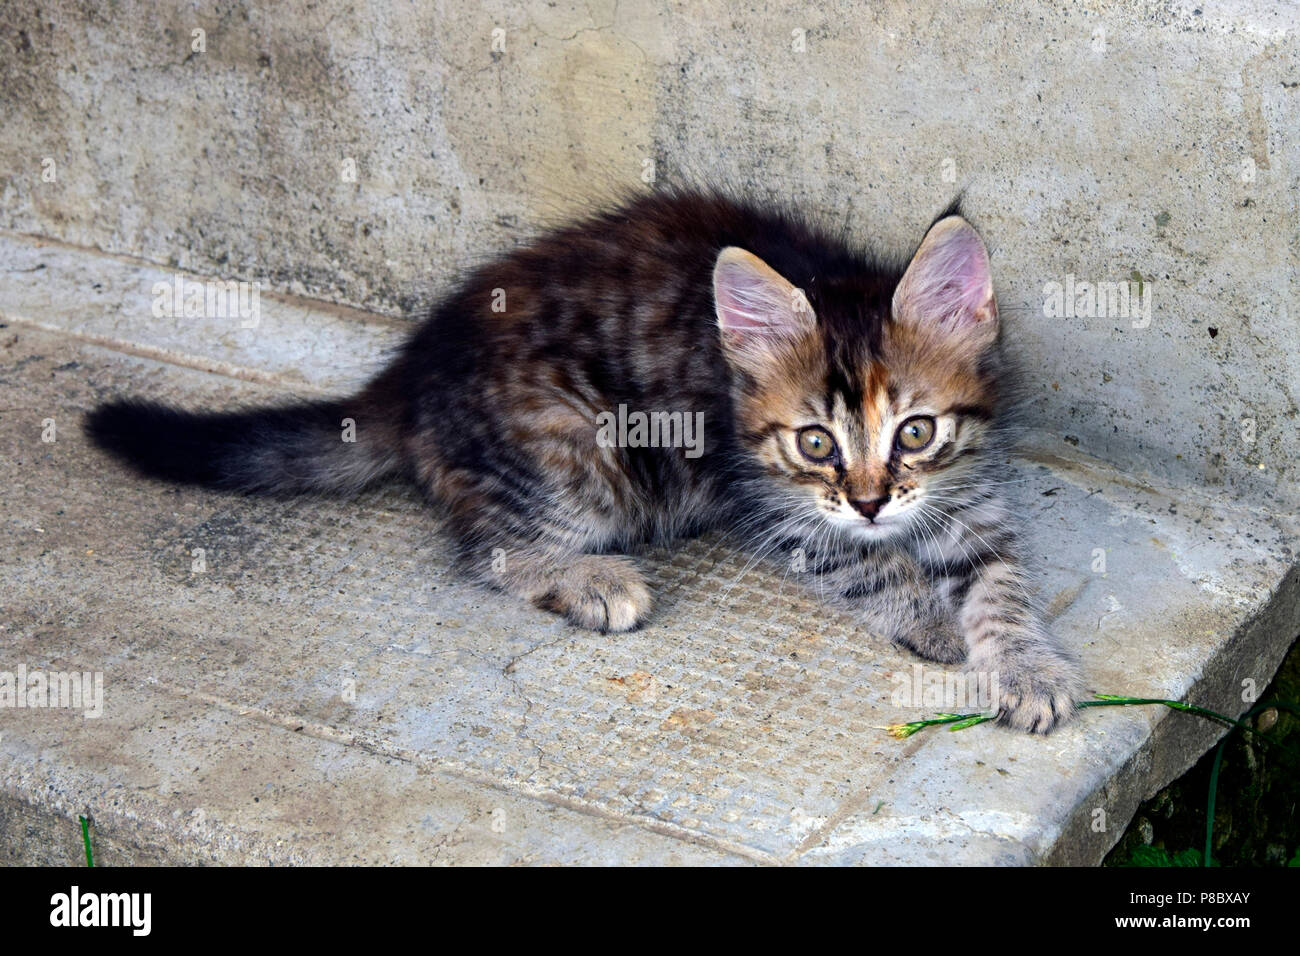 Striped, grey tabby kitten on concrete playing with a thread of grass Stock Photo